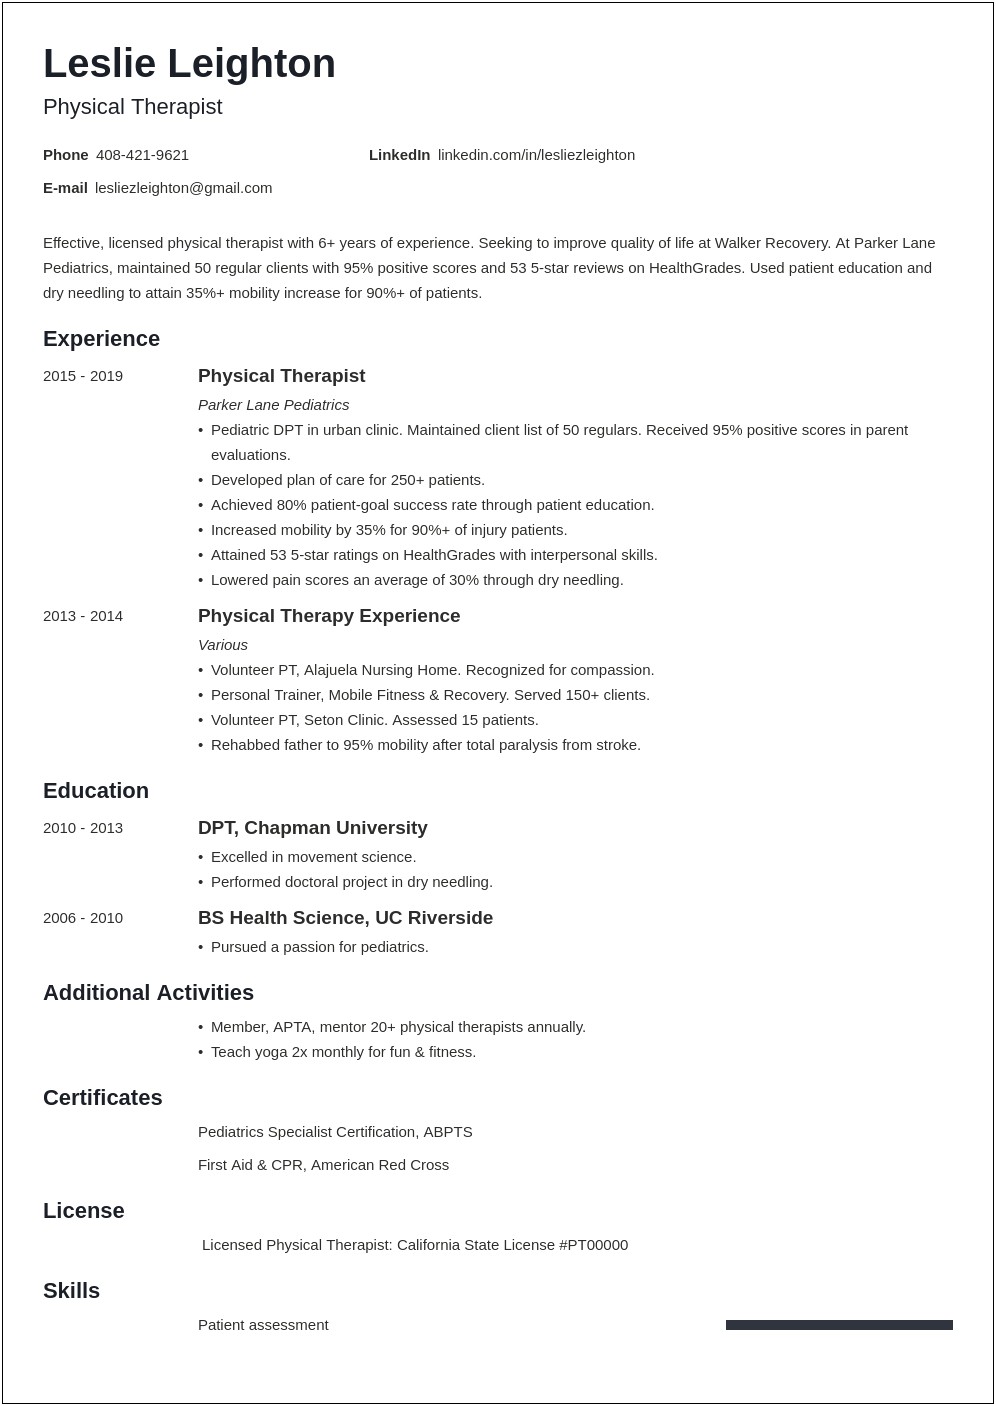 Physical Therapist Technician Resume Sample